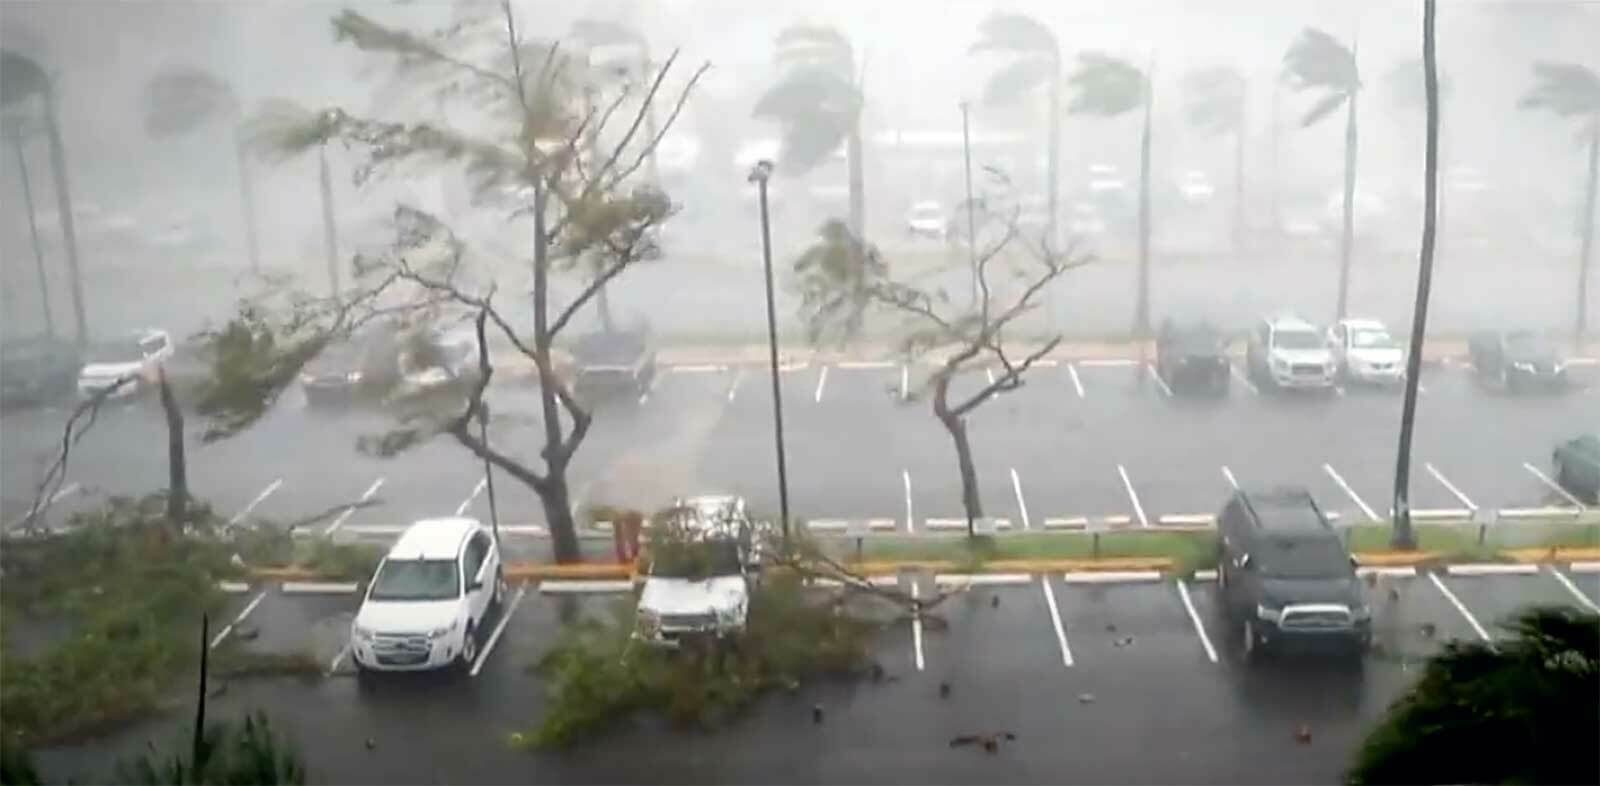 High winds from a hurricane damages trees and cars in a parking lot.